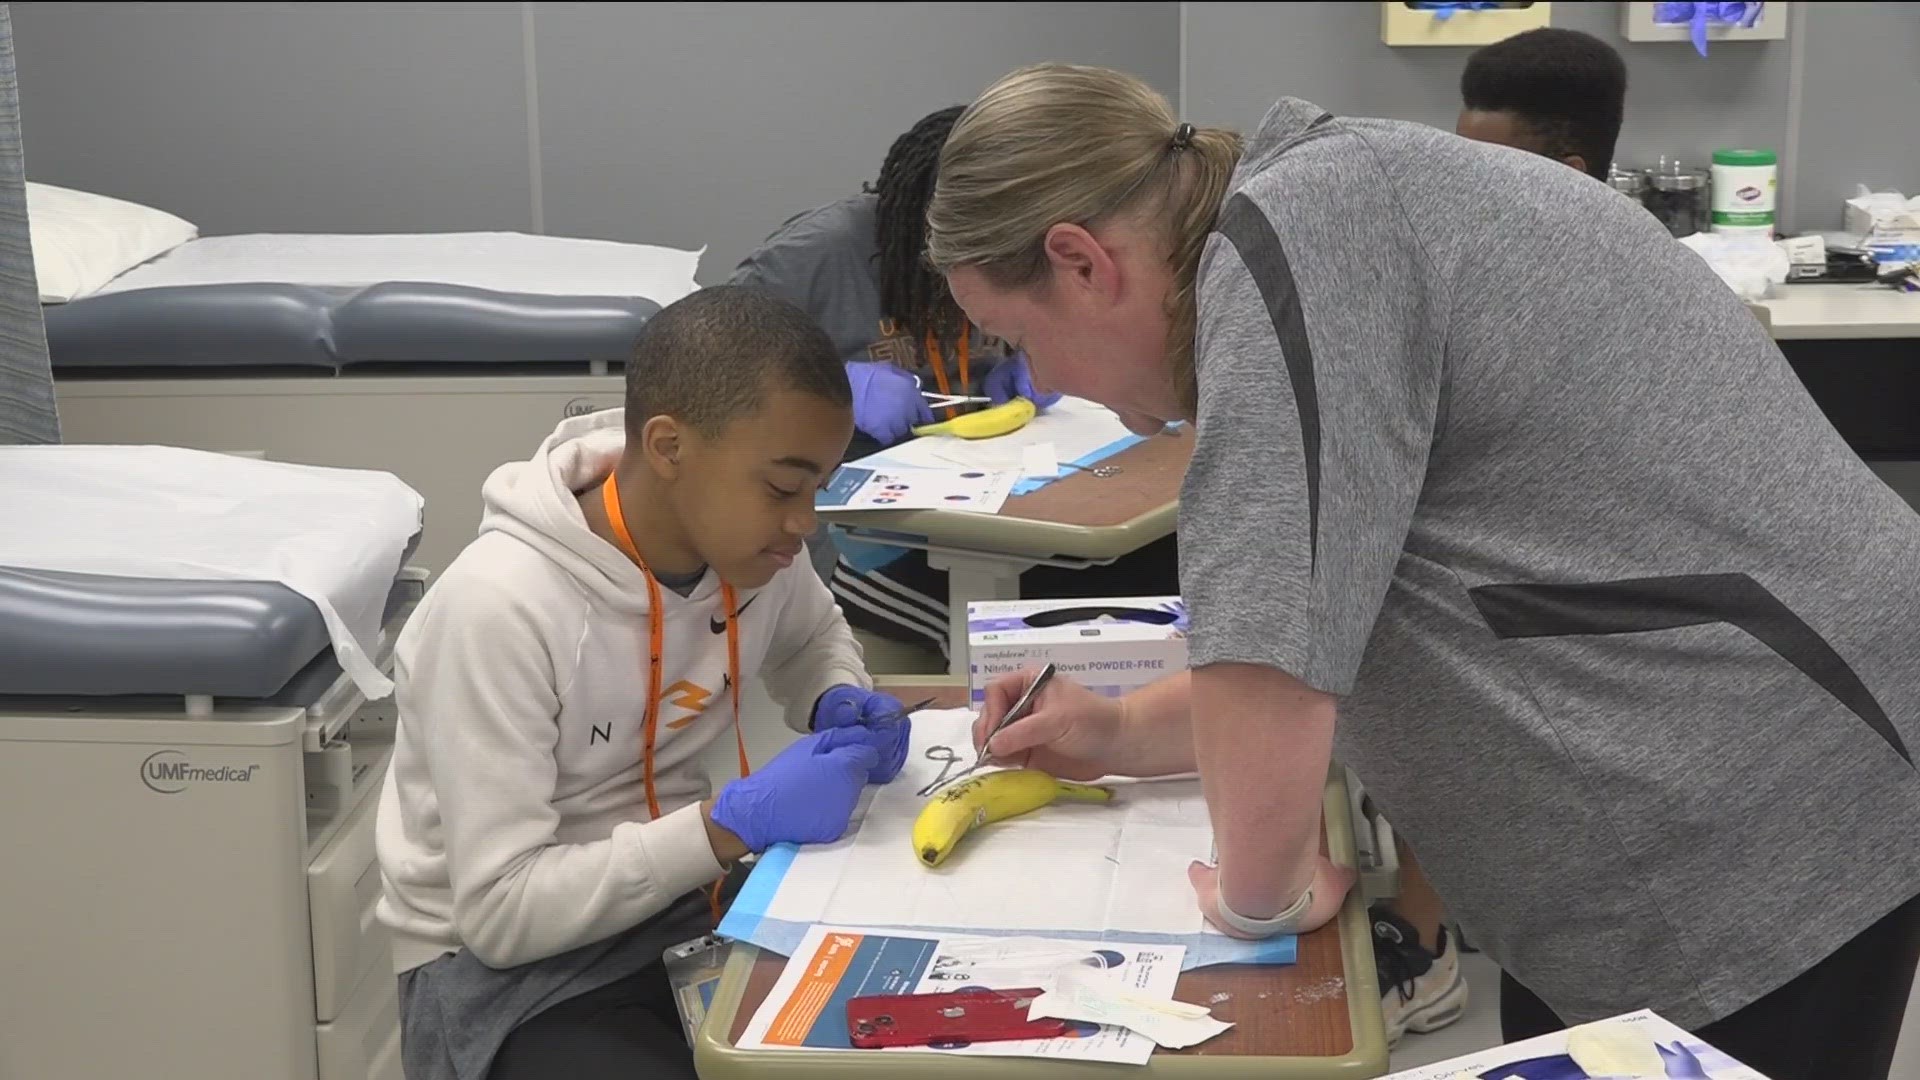 The health professions camp at the University of Findlay aimed to connect students with mentors and spark student interest in medical careers.